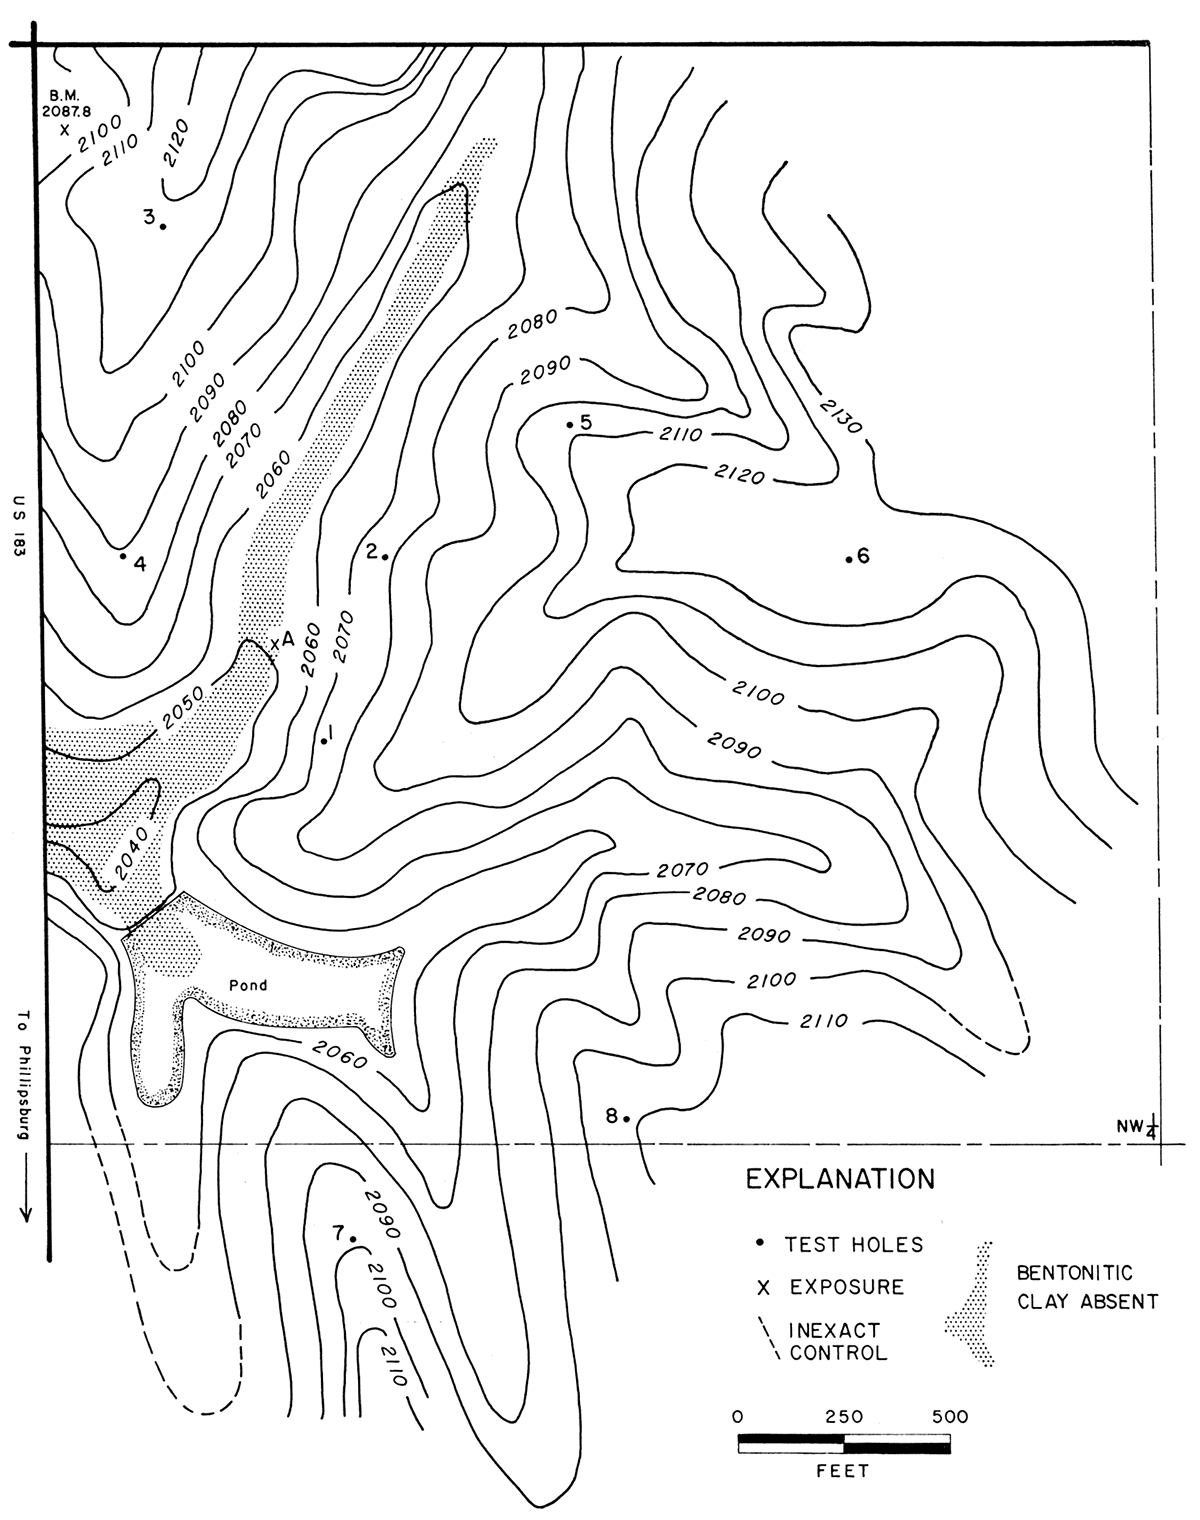 Topographic map of part of sec. 11, T. 1 S., R. 18 W., showing location of exposure and drill holes.